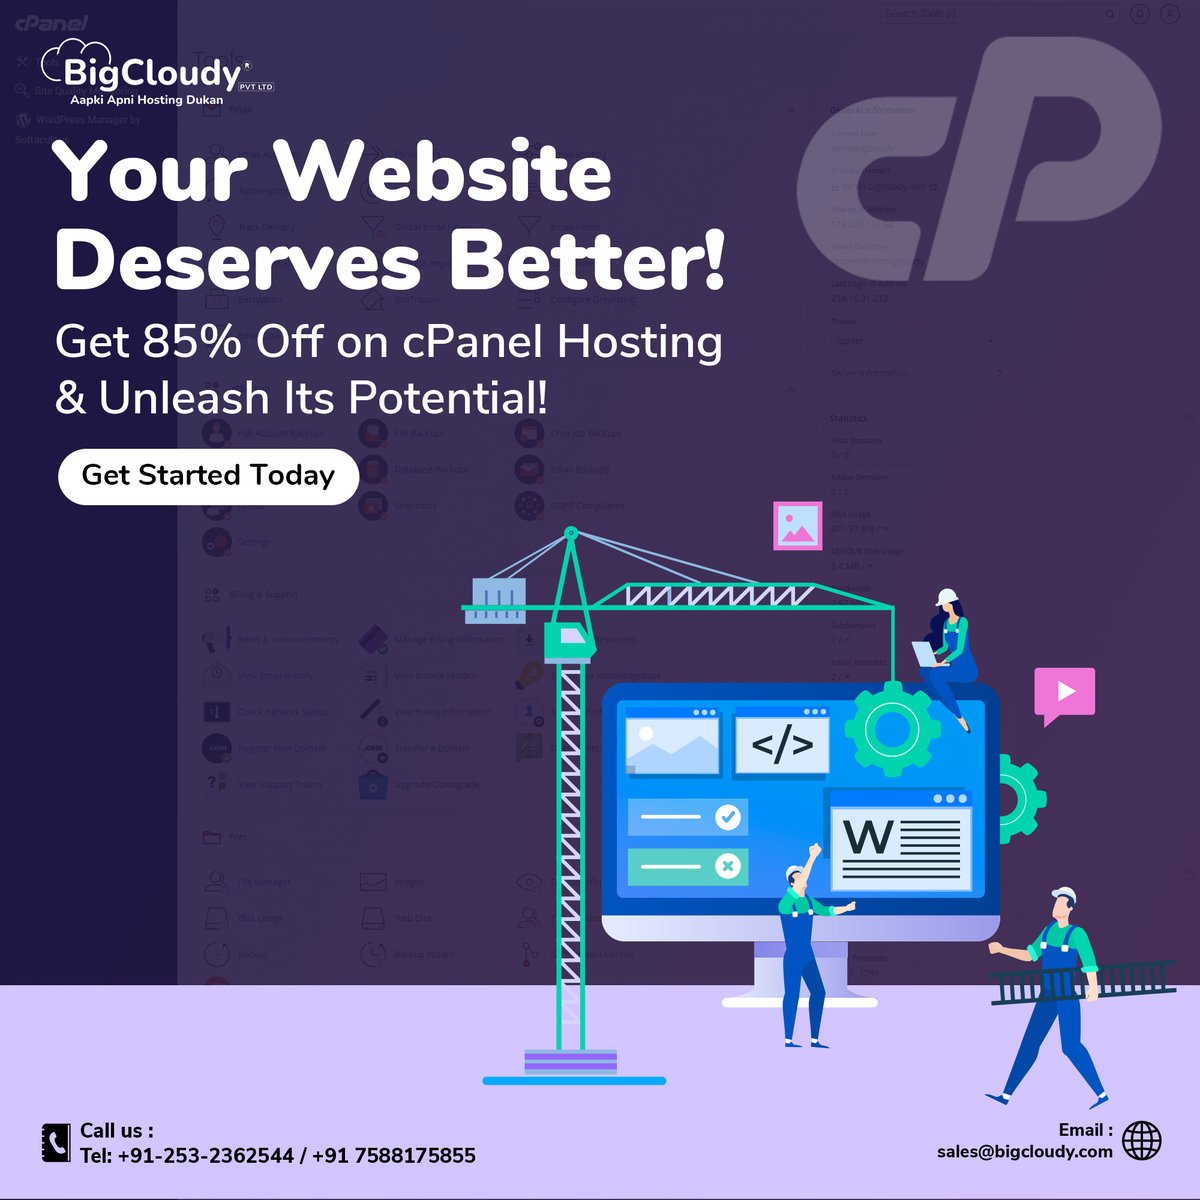 Unlock the true power🌟of your website! 🌐Say goodbye to slow loading times🐢and hello to #lightningfast performance⚡with 85% off #cPanel Hosting. 👨🏻‍💻

Your #website 🖥️ deserves the best, so why settle for anything less? 🌠

#BigCloudy #WebHosting #onlinebusiness